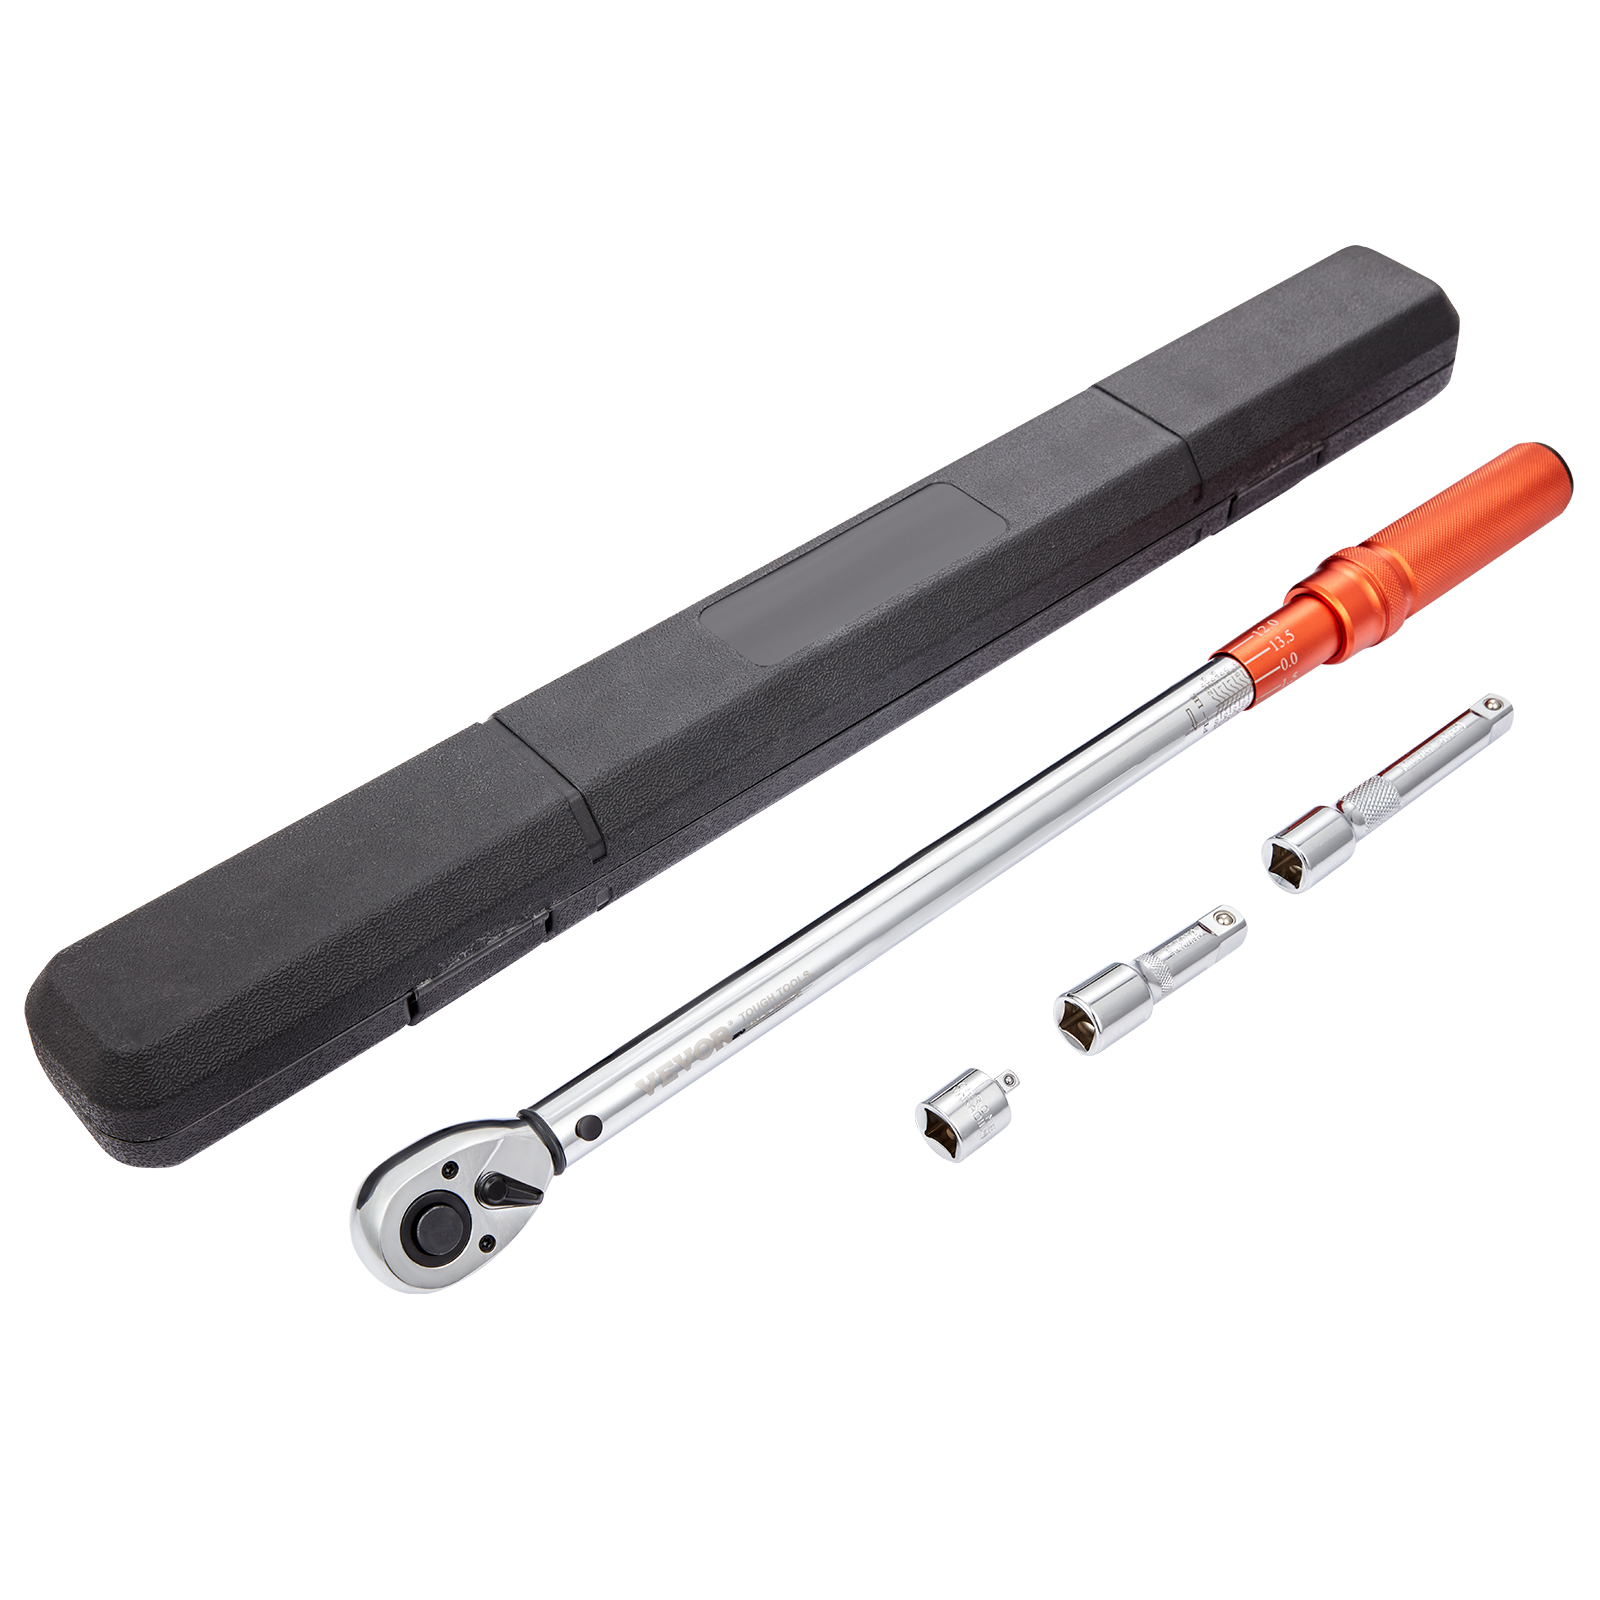 Torque Wrench,Torque Adapter,Extension Rod